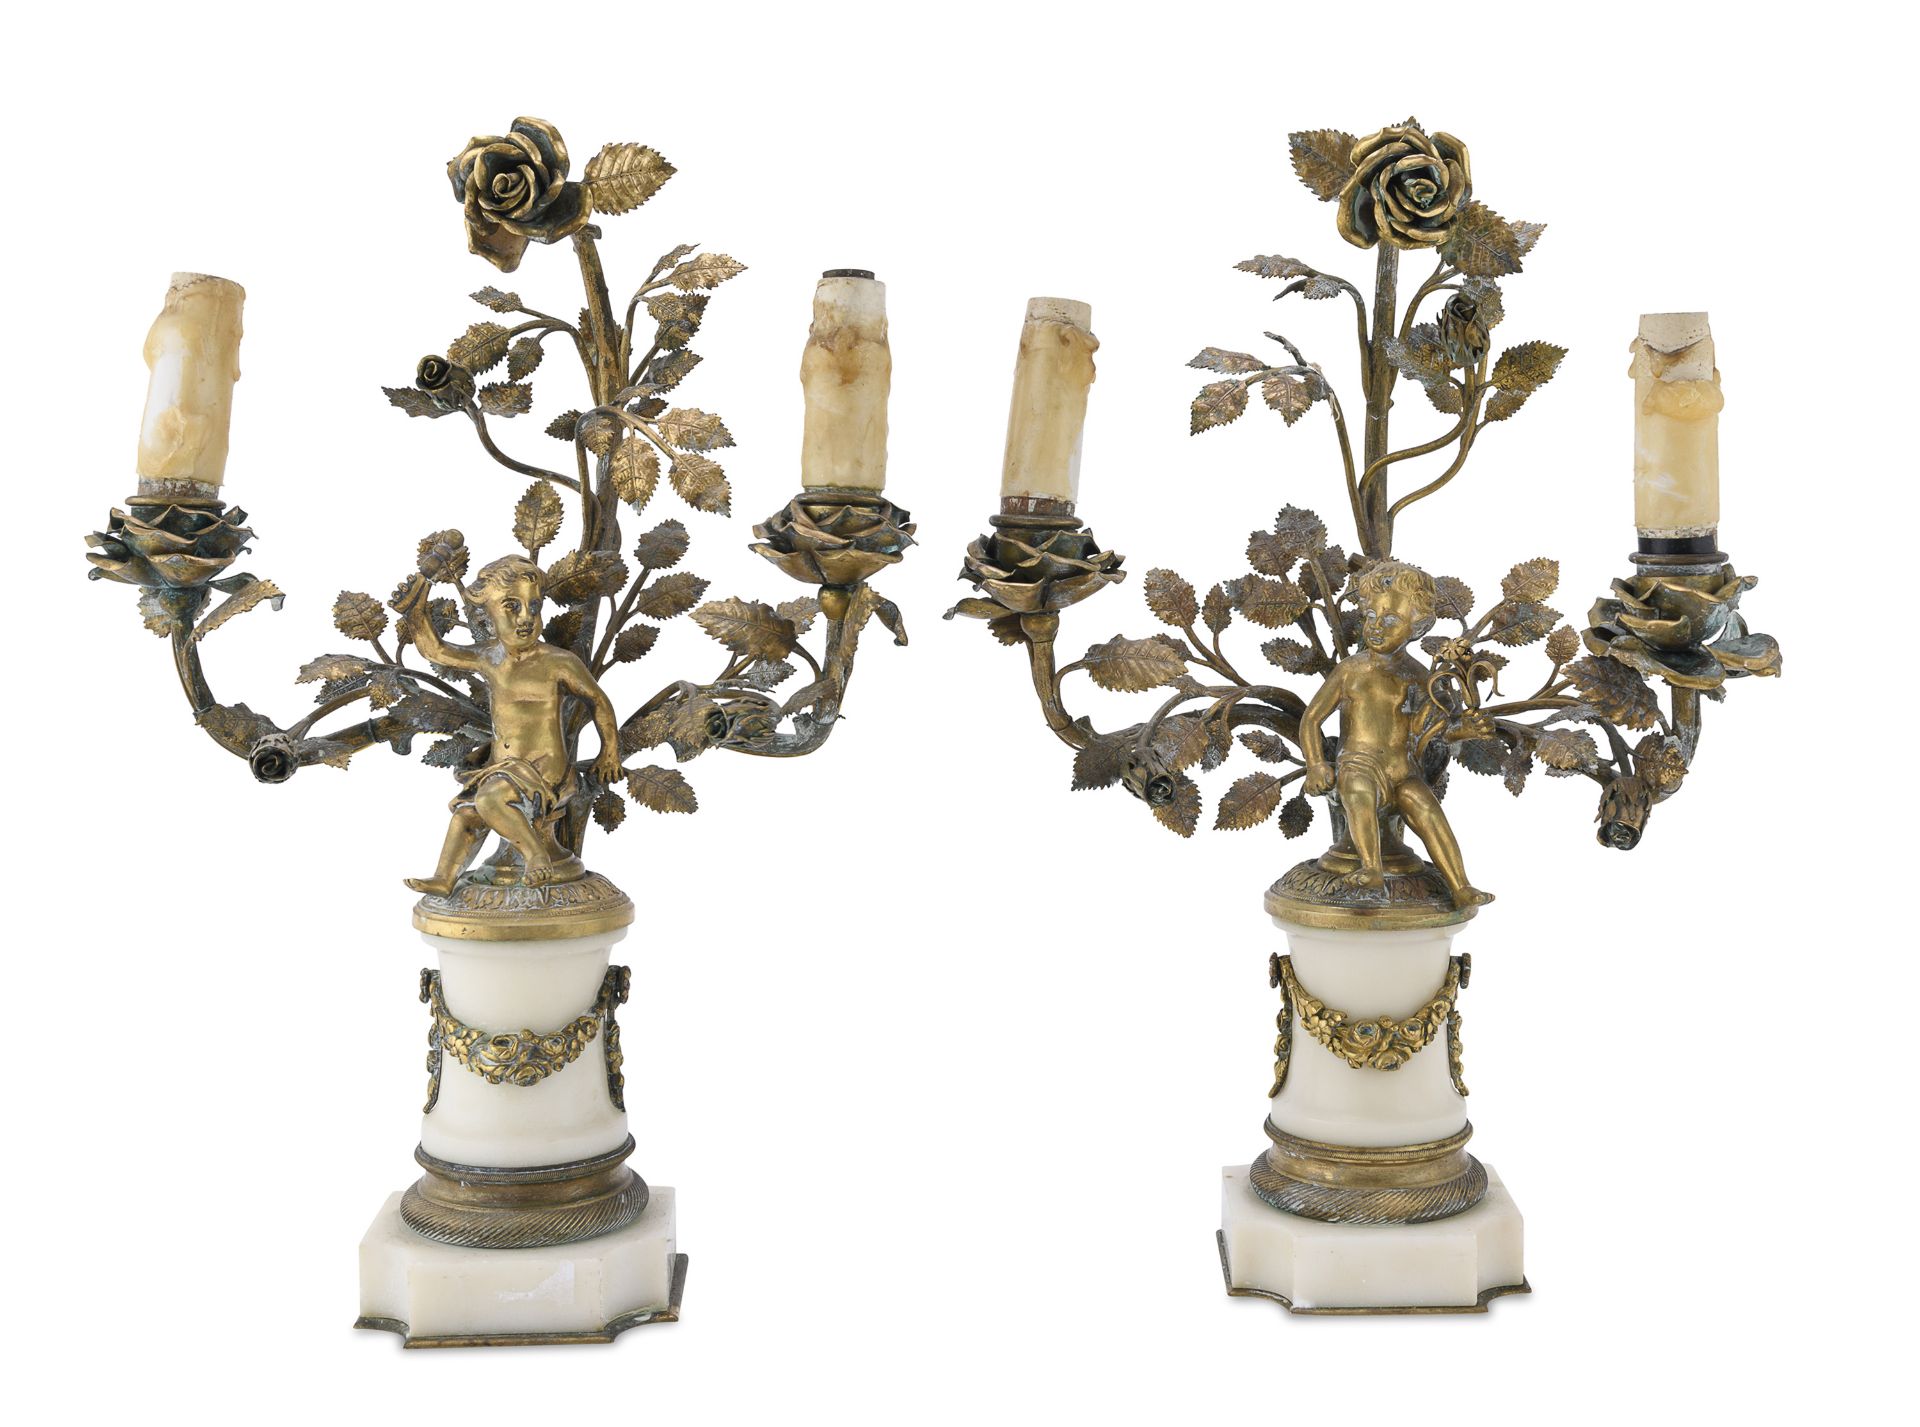 PAIR OF SMALL BRONZE CANDLESTICKS EARLY 19th CENTURY